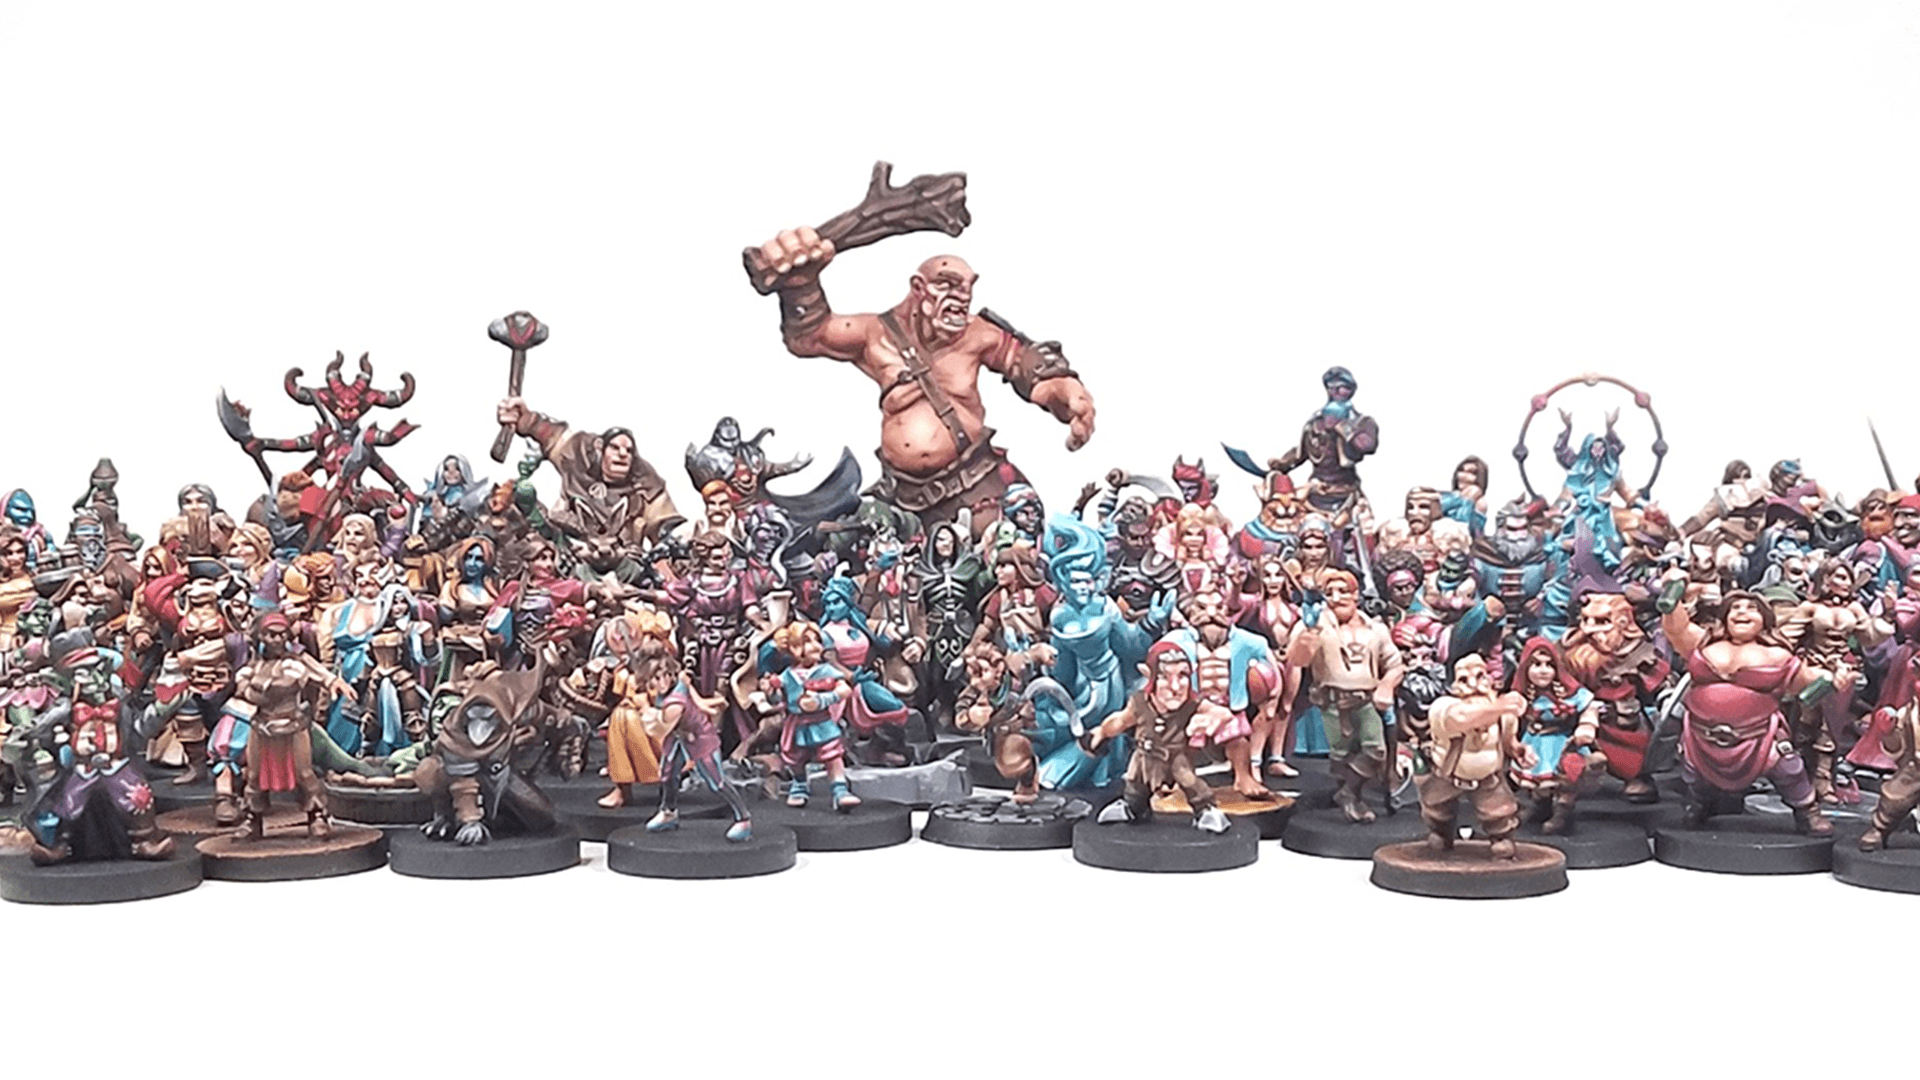 Minis by Vae Victis, 95.6% of the paints pictured are by Reaper Miniatures, and all painted by Cara.